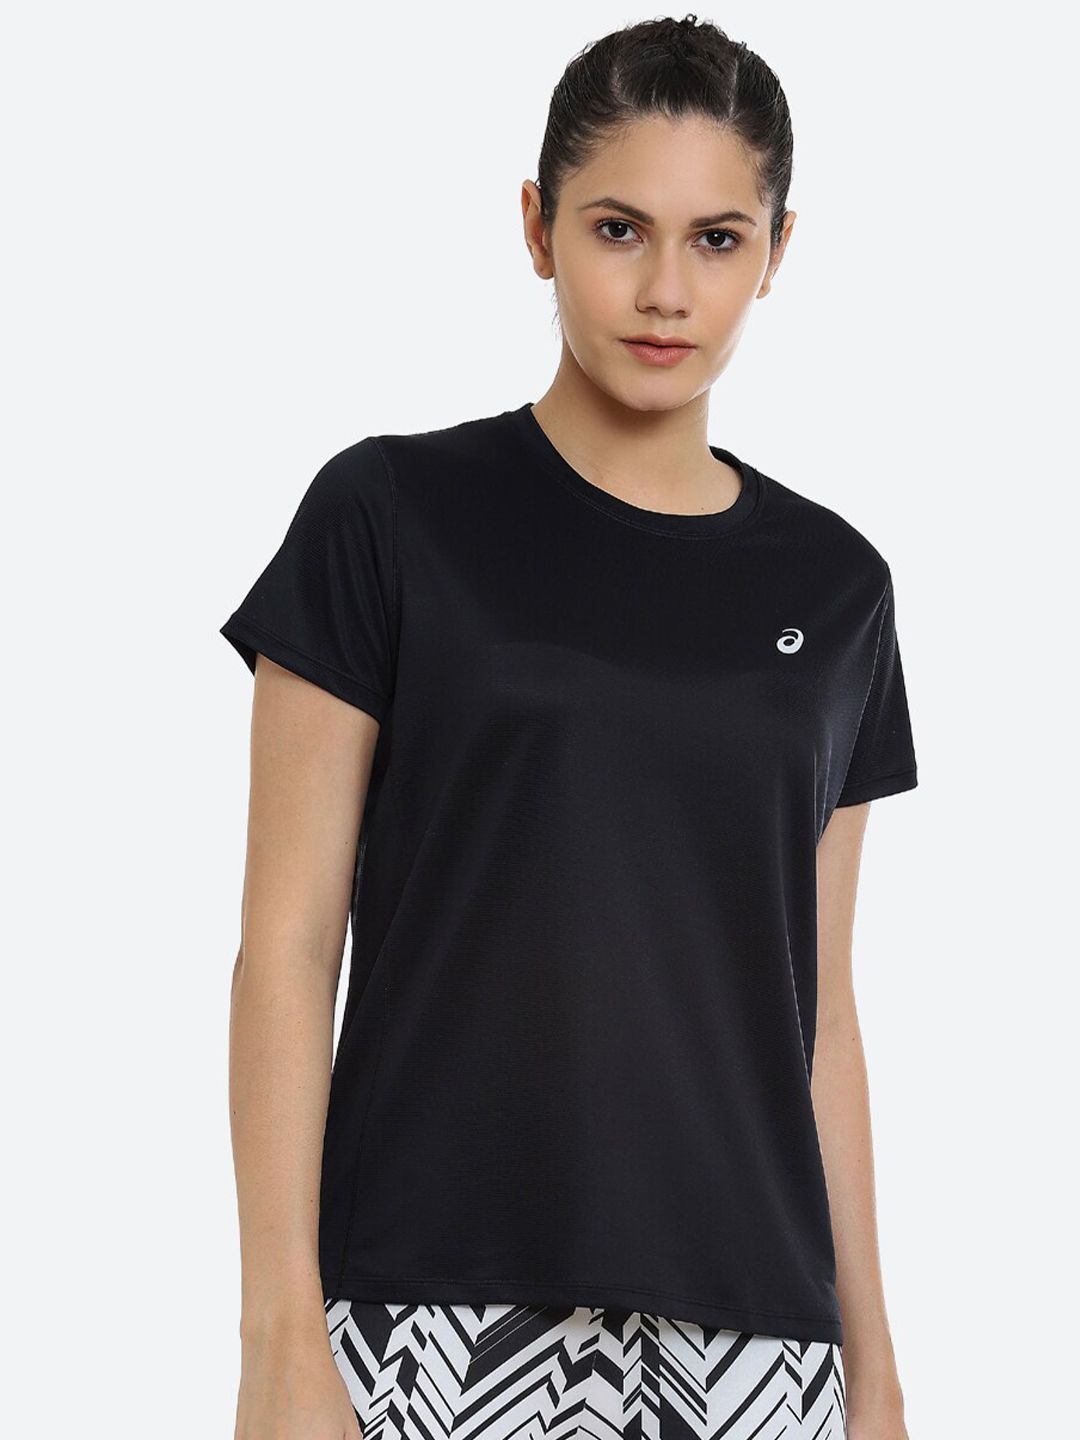 ASICS Silver Ss   Women Black Extended Sleeves Running T-shirt Price in India